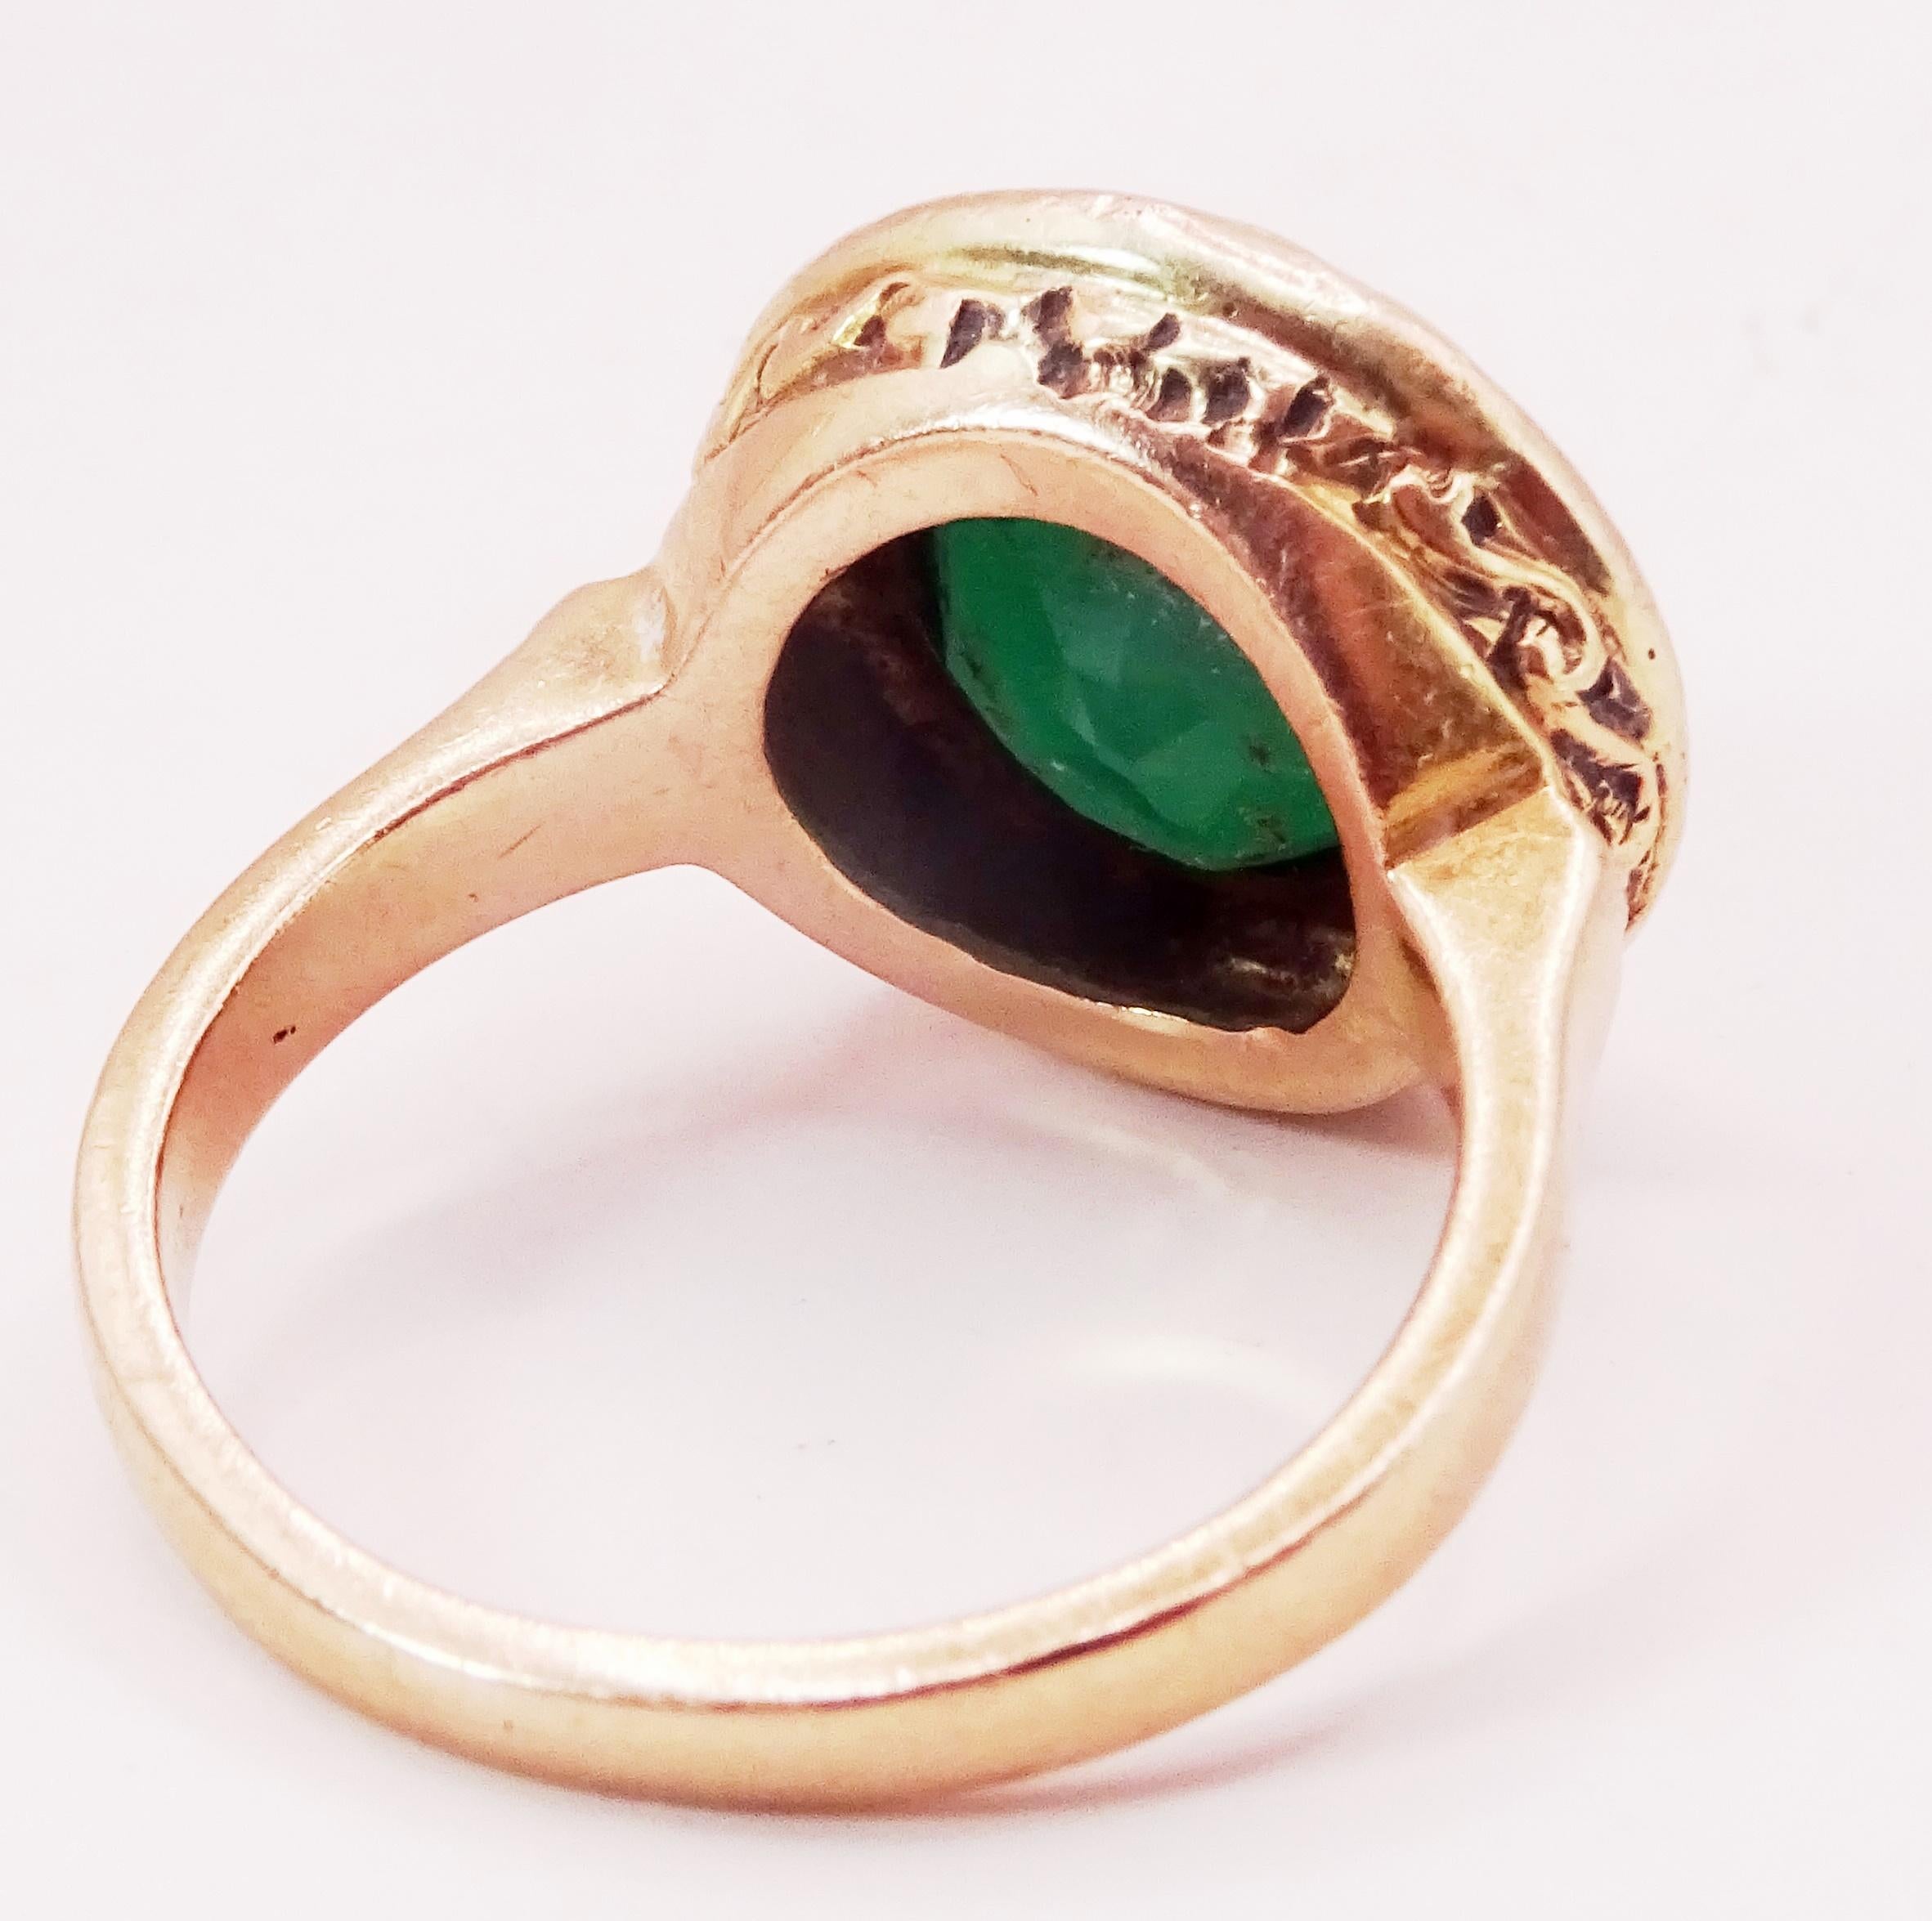 This is a contemporary ring Made in fully hallmarked 14 karat Rose Gold.
A 12 mm Round Green Agate sits in a flush setting in a crown design evocative of Victorian Jewelry.
The Ring is very well built and has a massive feeling to it
It is Size 7.5